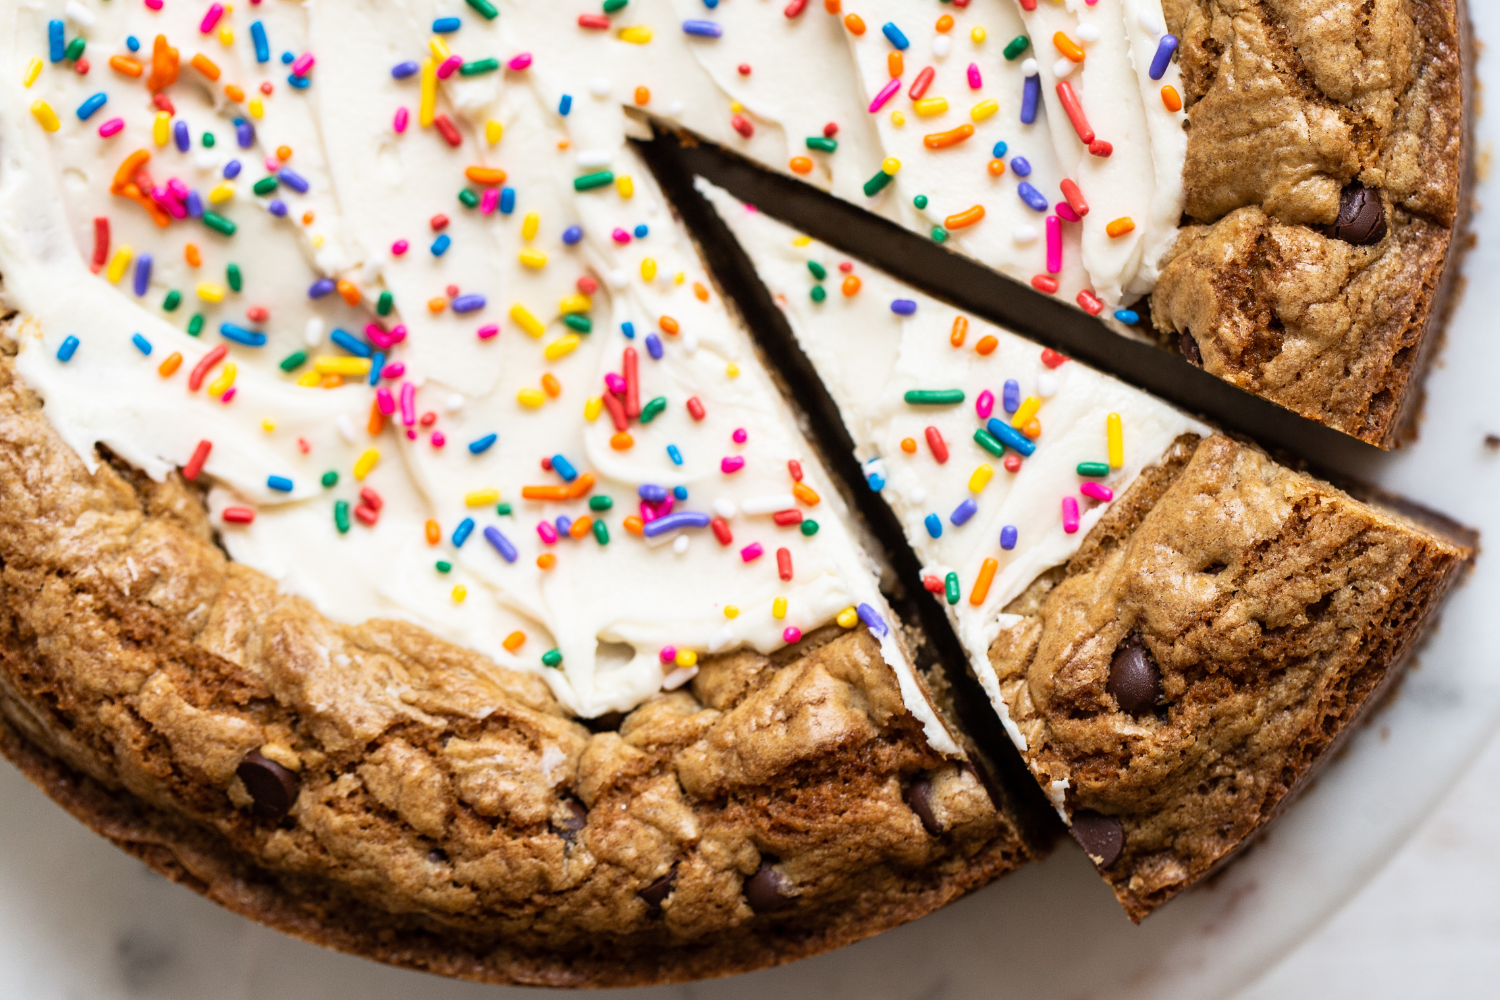 chocolate chip cookie cake with creamy white frosting and rainbow sprinkles, with a slice being cut to serve.